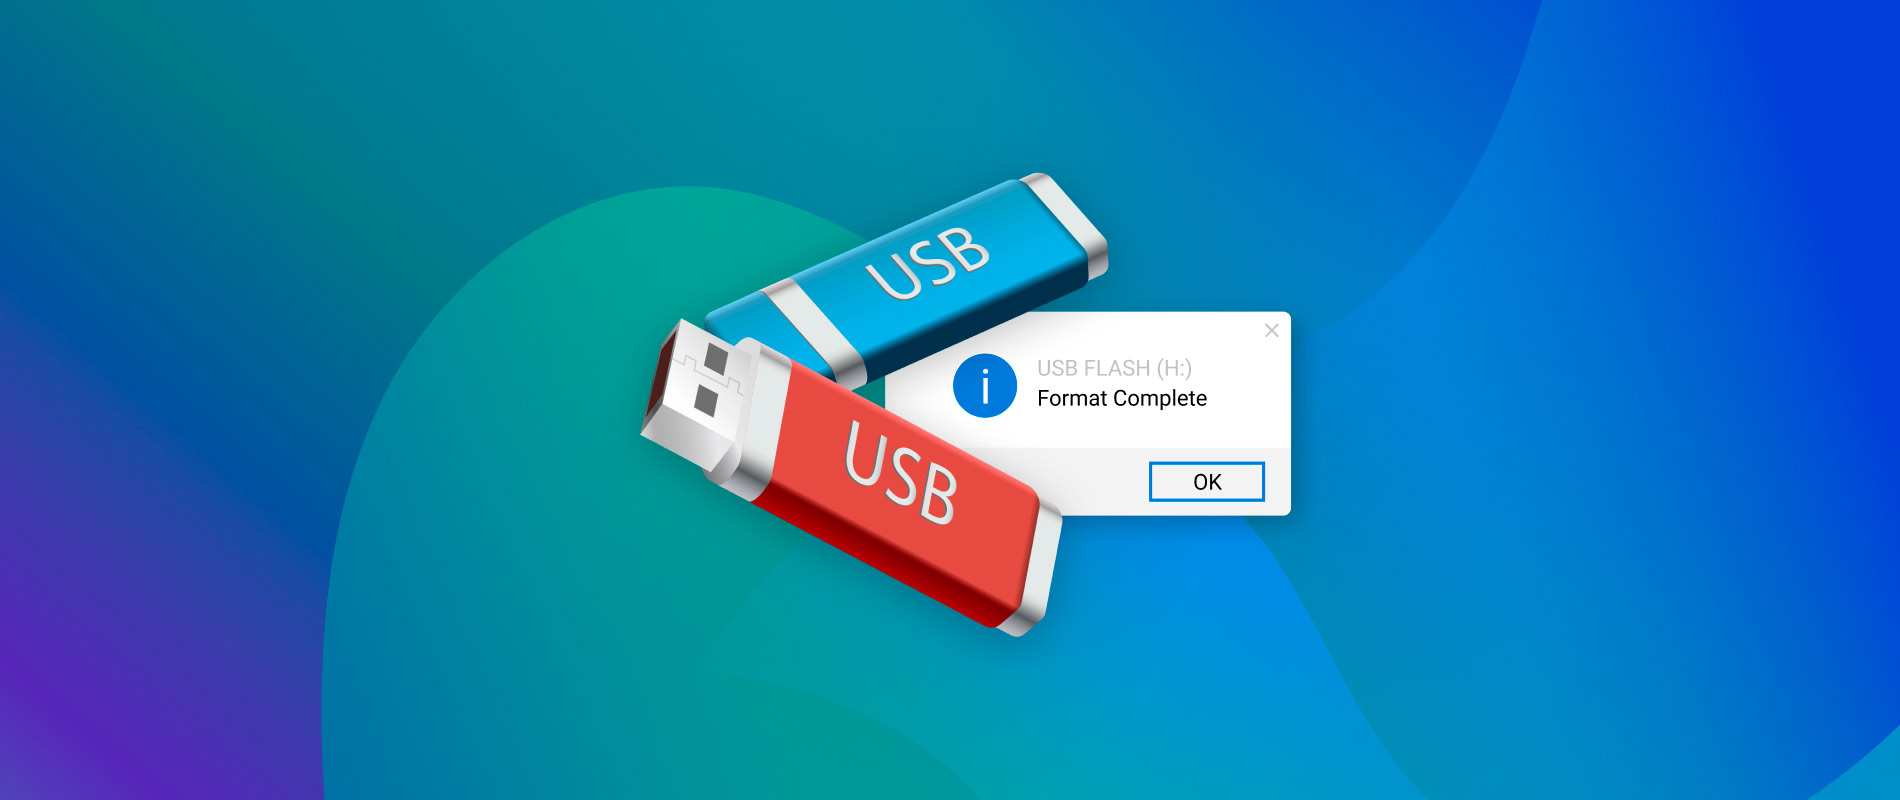 usb drive showing less space